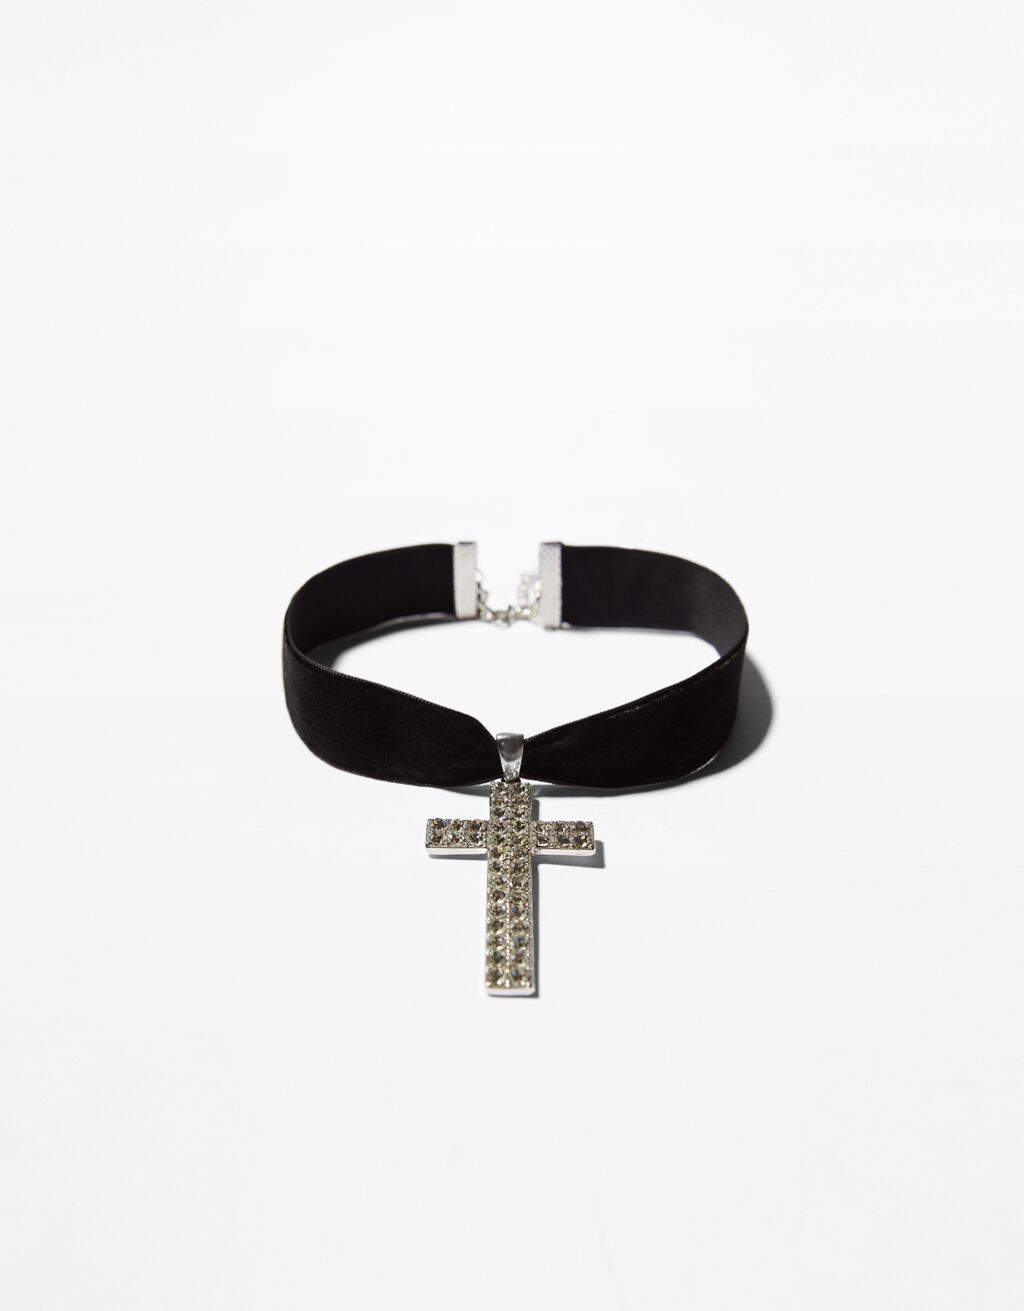 Choker necklace with a bejeweled cross